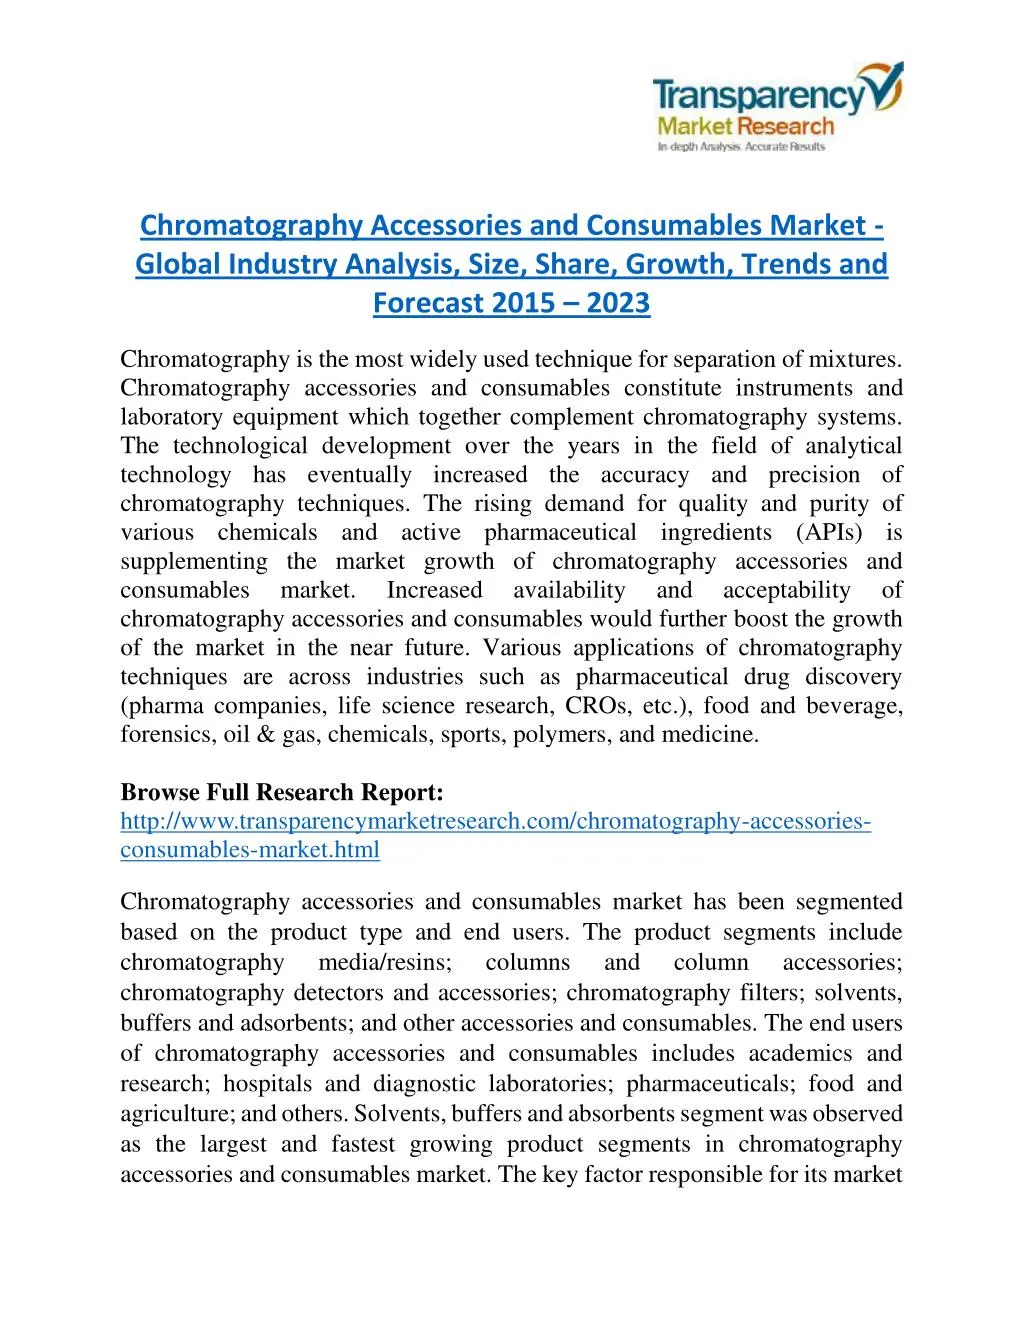 chromatography accessories and consumables market